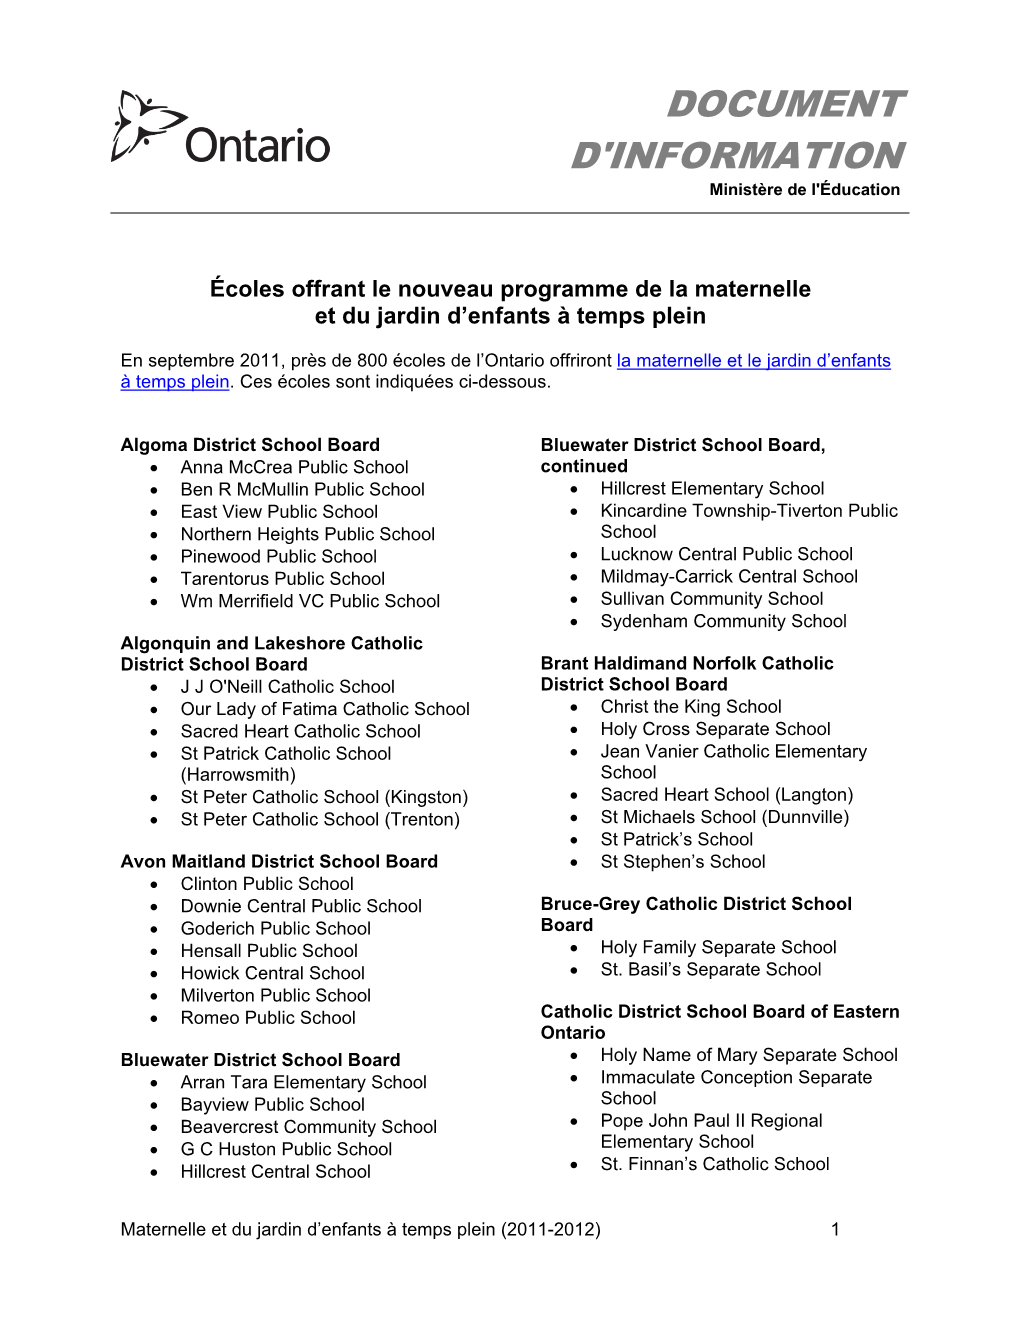 List of Schools for 2010-11 and 2011-12